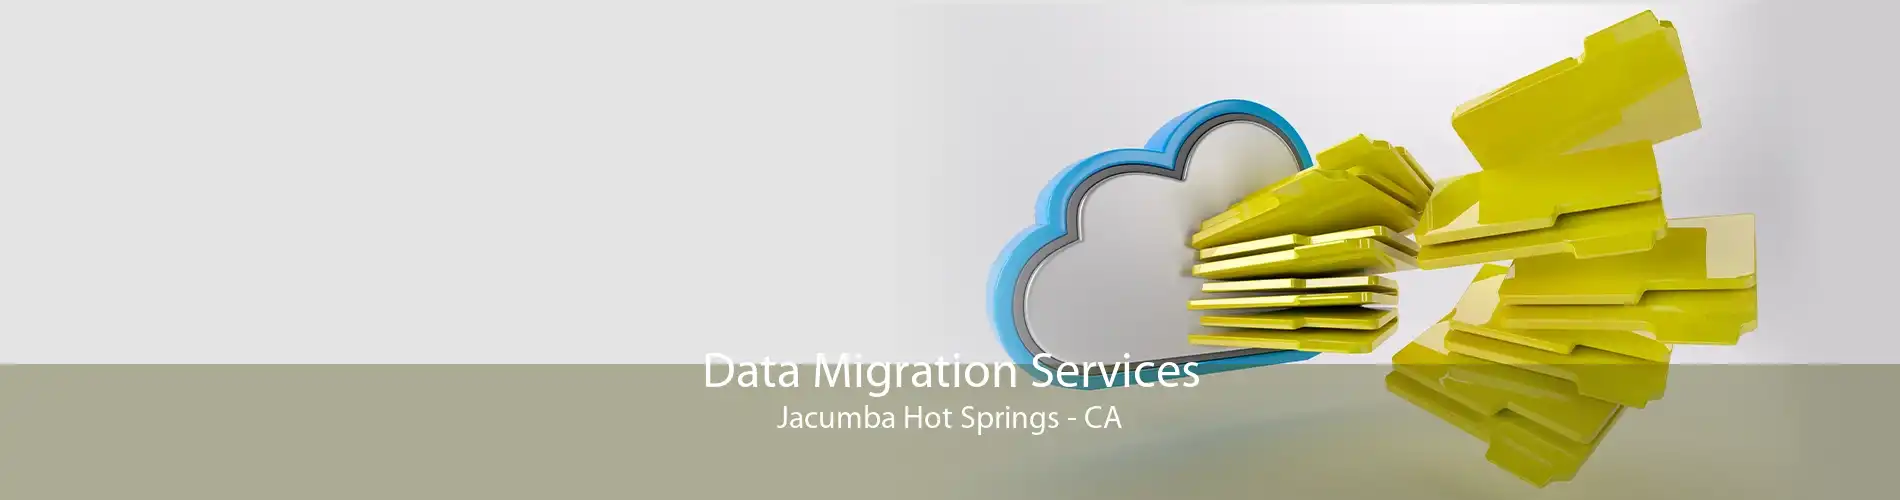 Data Migration Services Jacumba Hot Springs - CA